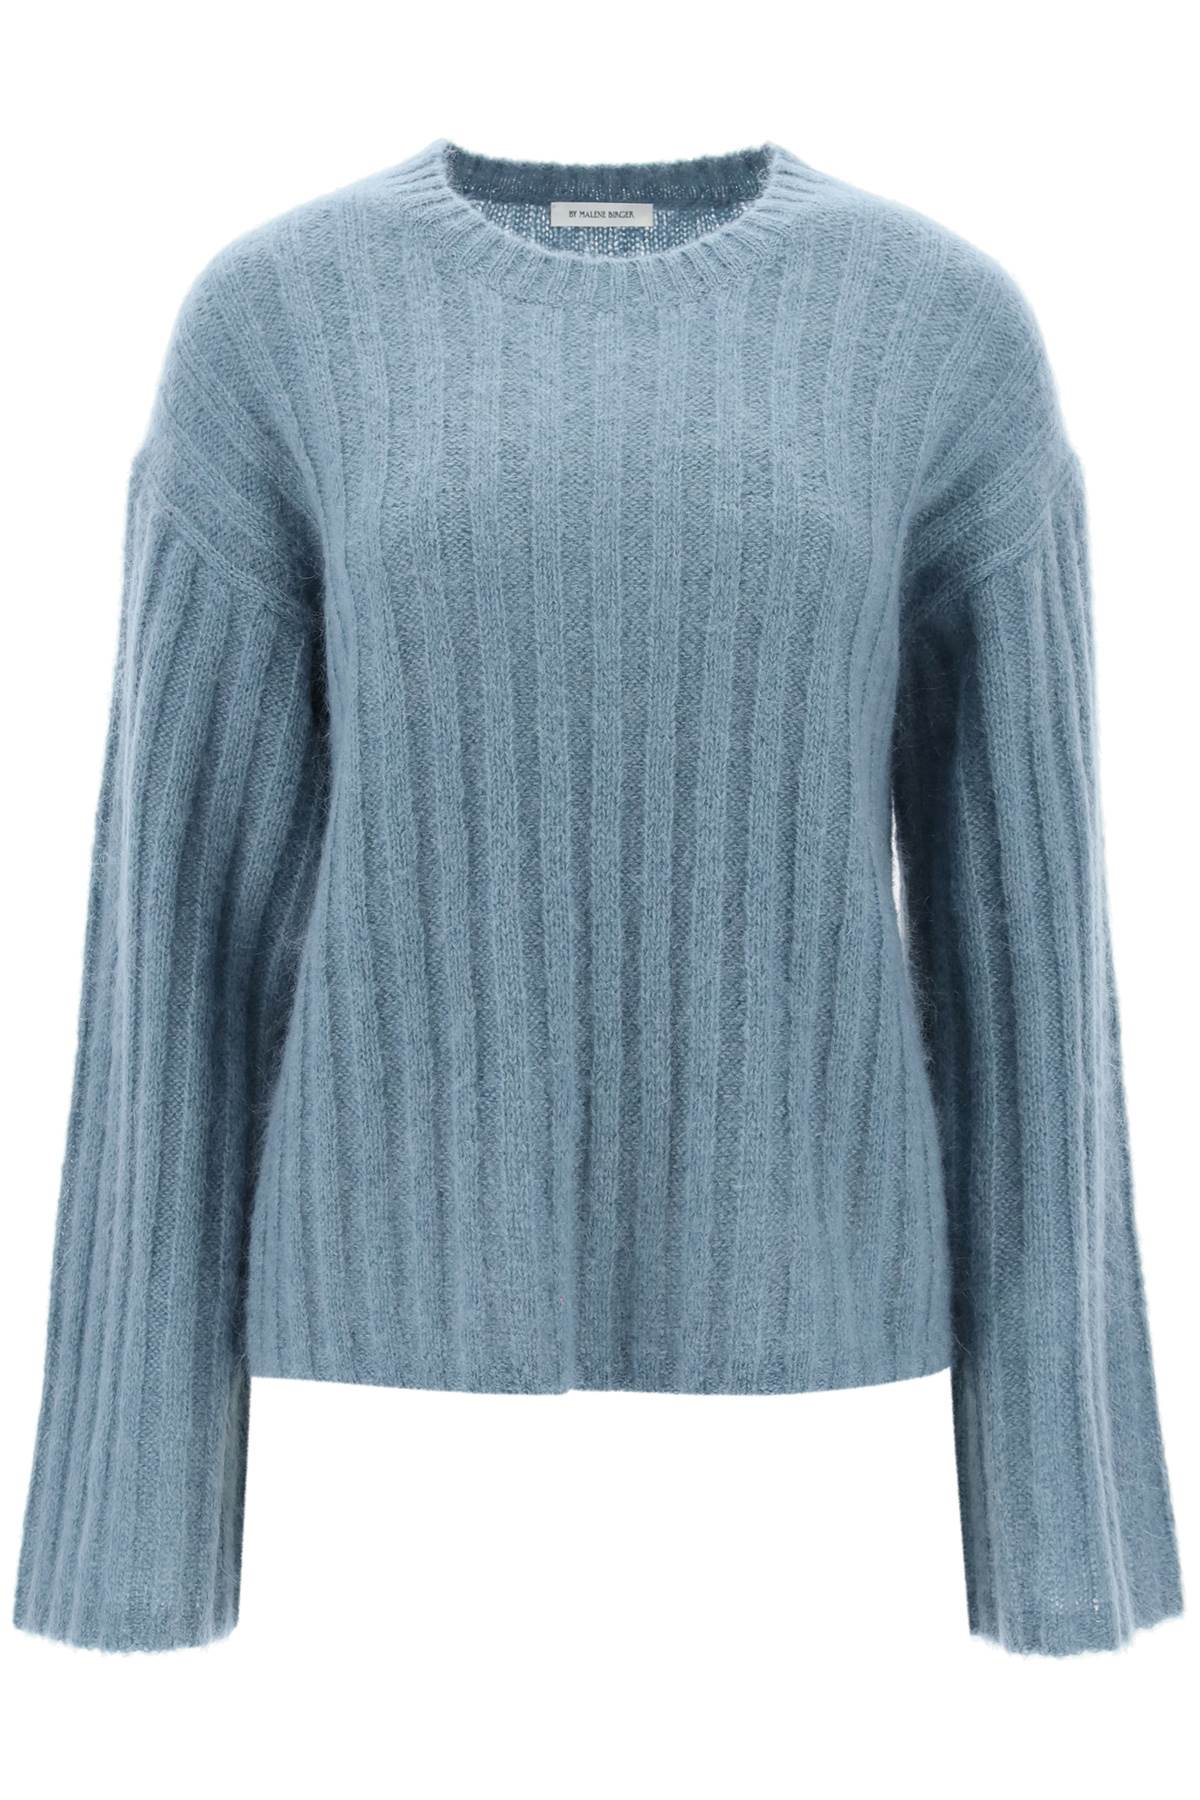 By Malene Birger Ribbed Knit Pullover Sweater   Light Blue